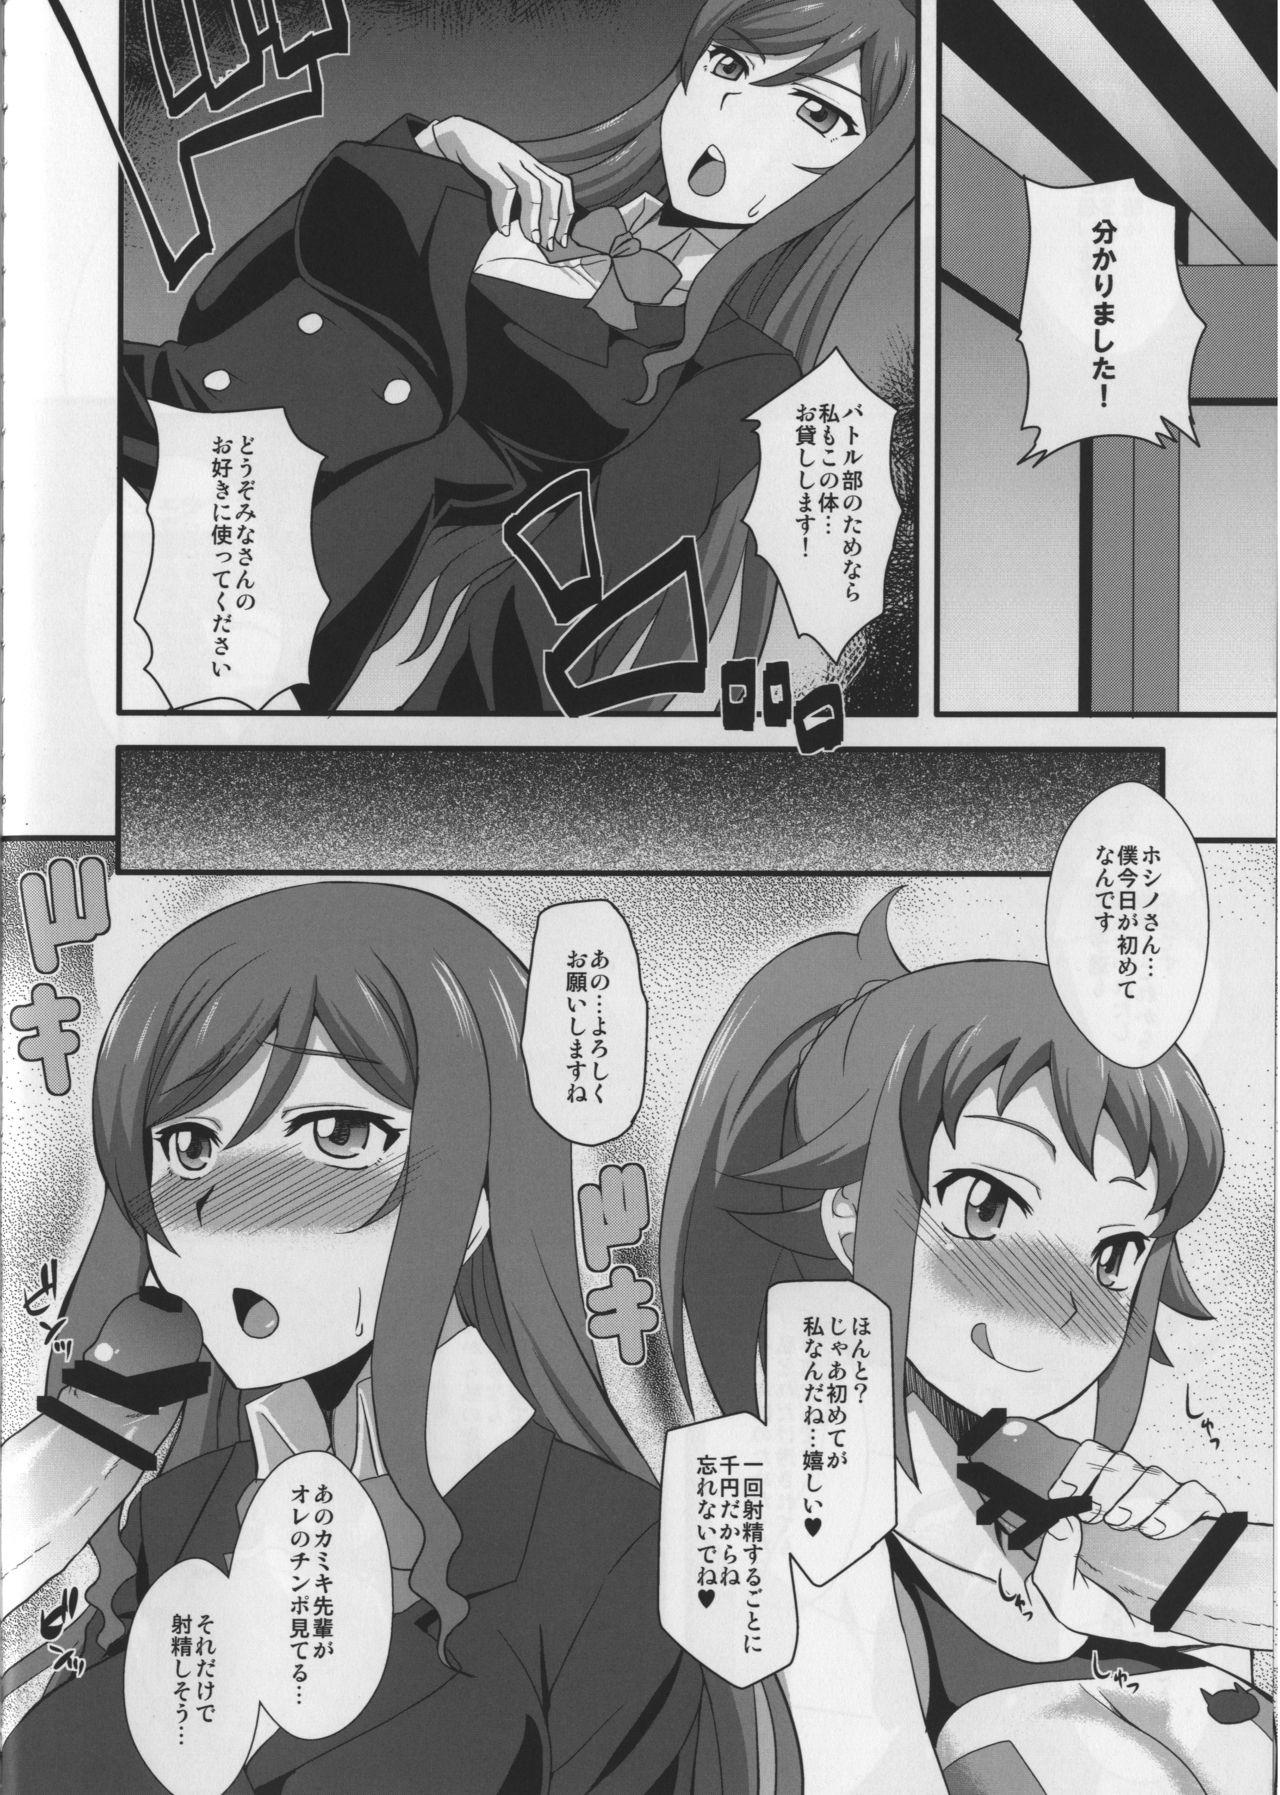 Ghetto Sex Fighters TRY - Gundam build fighters try The - Page 6